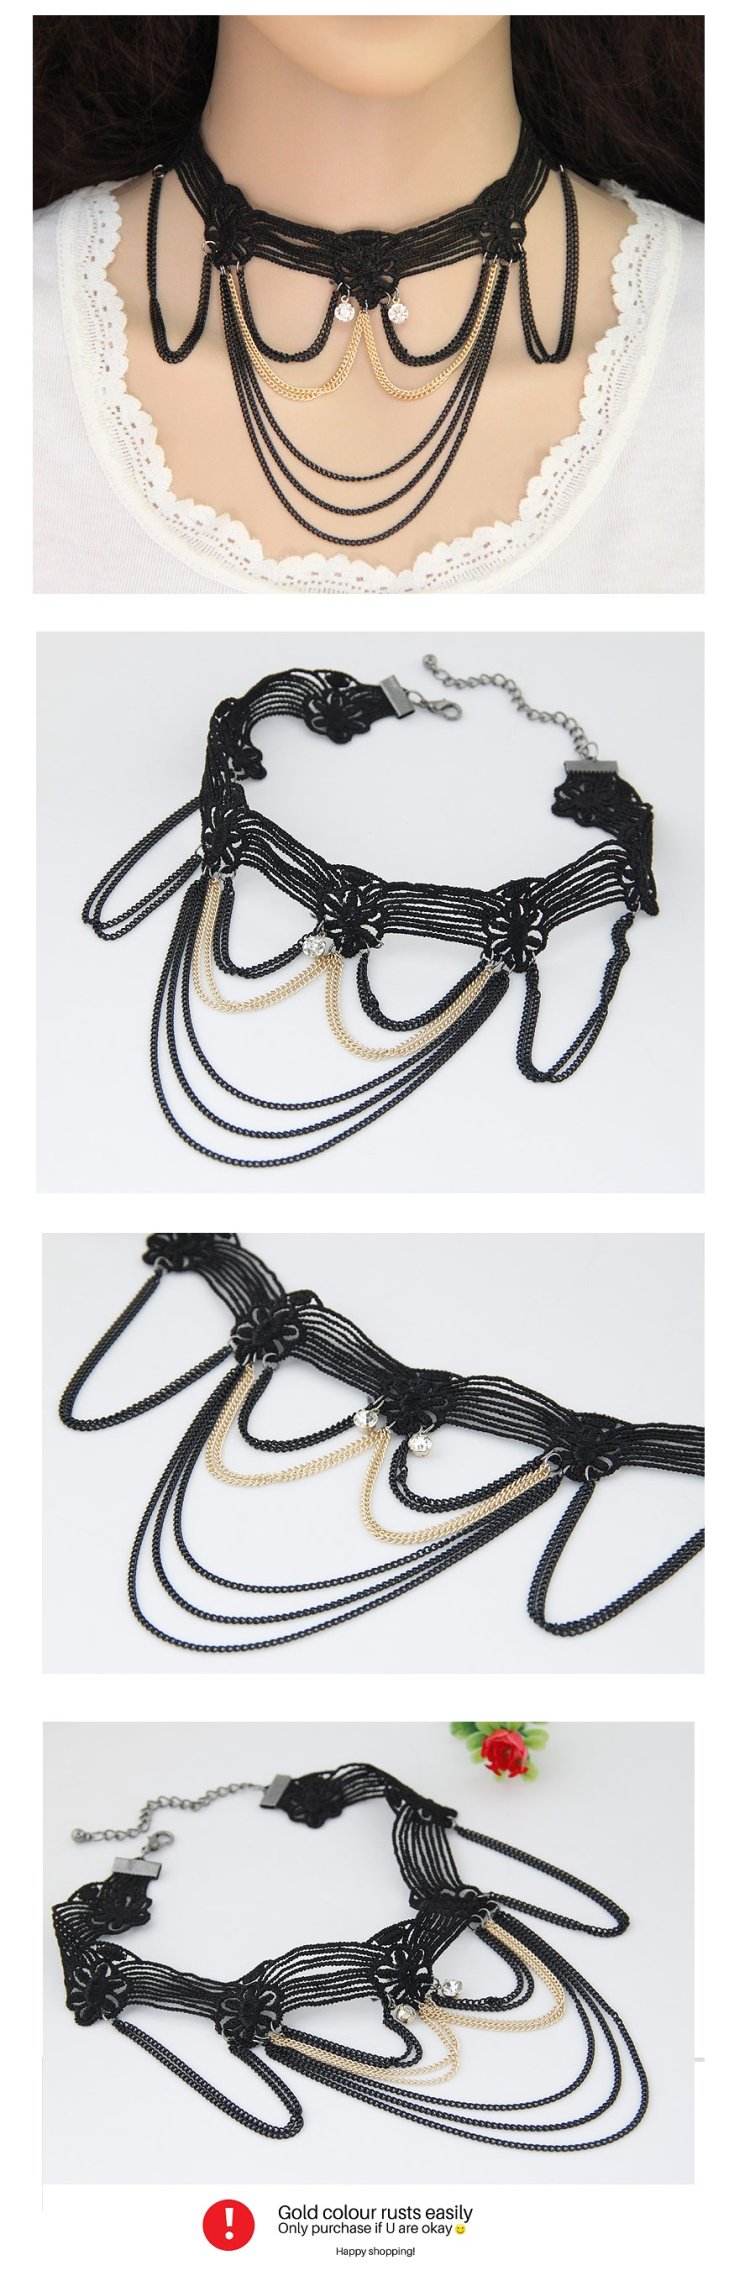 C110414112 Black lace crystals dinner choker necklace malaysia